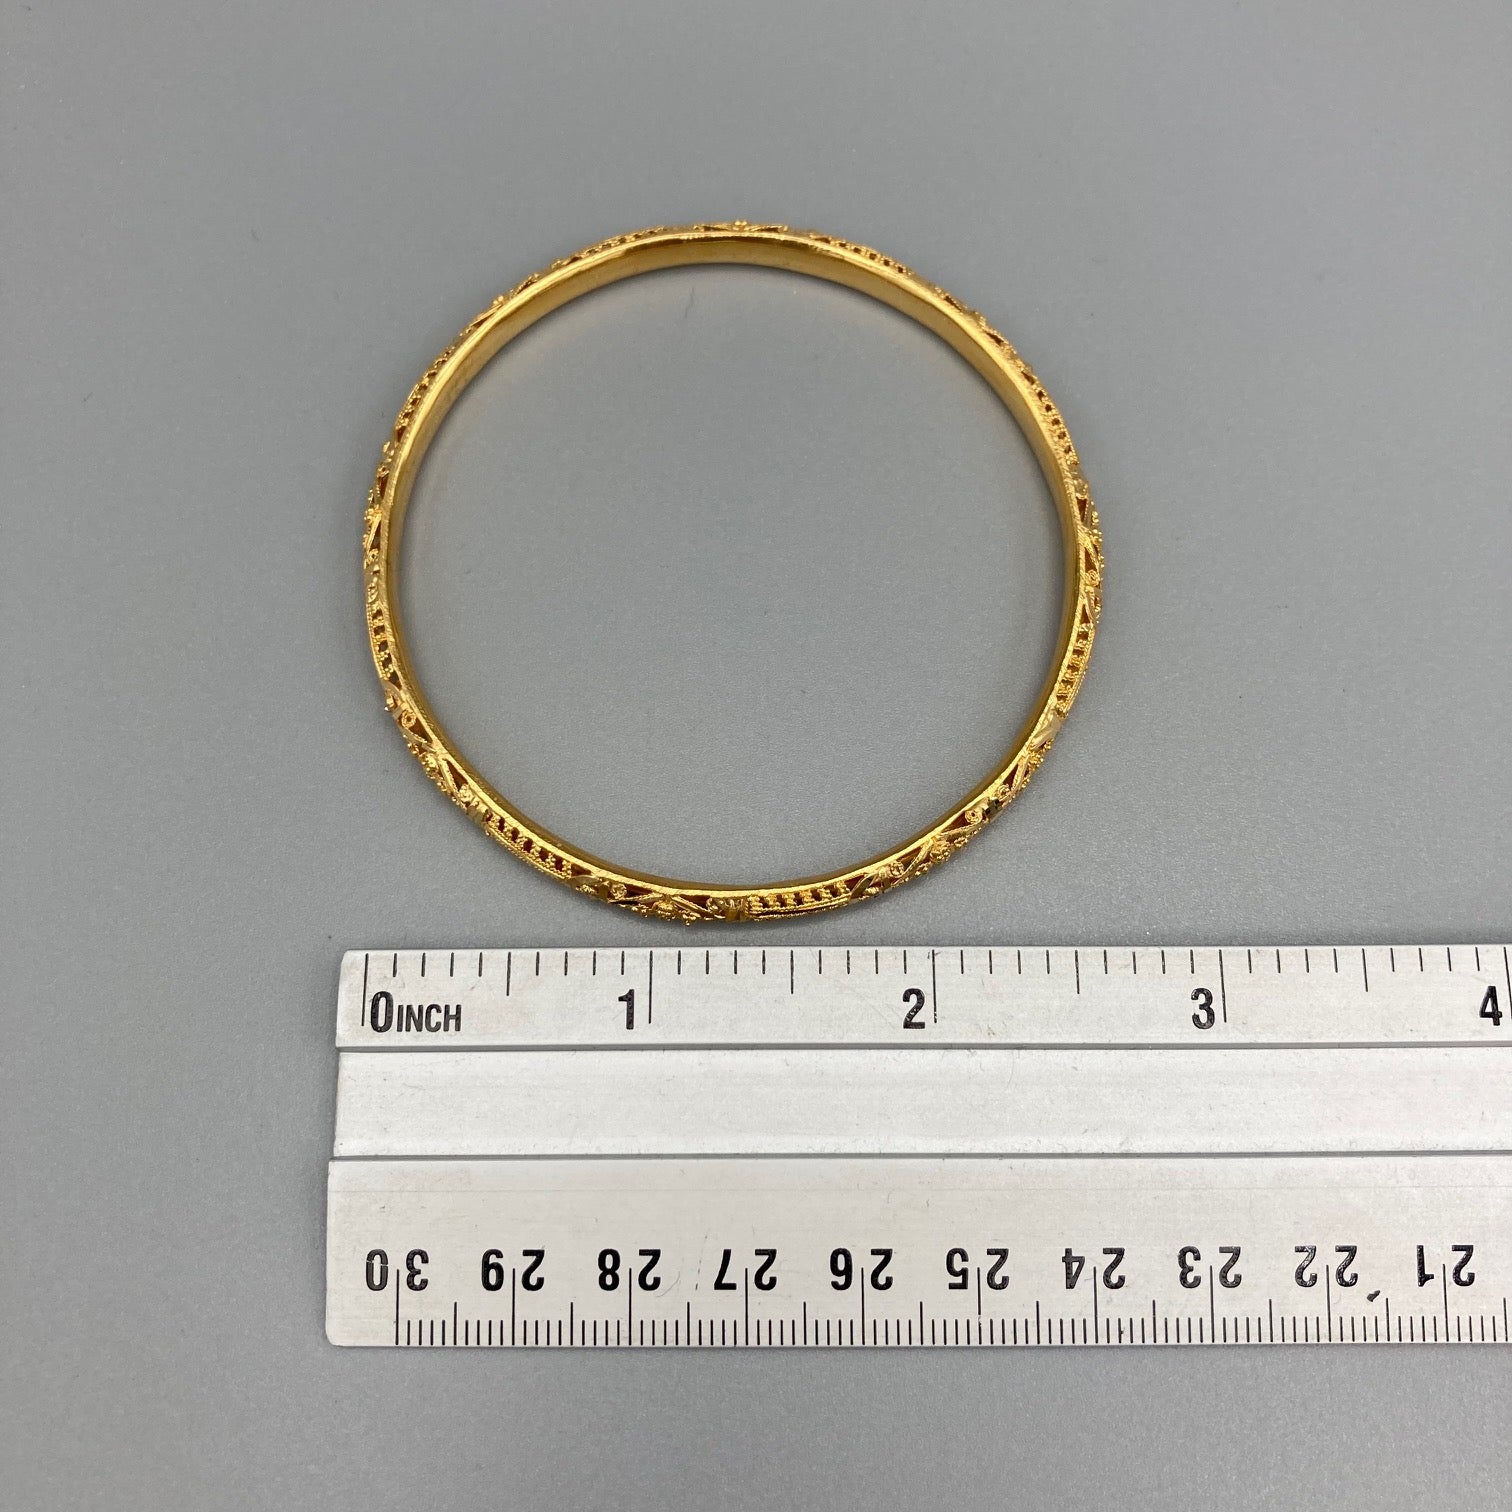 Indian Artisanal Bangle Crafted In 22k Yellow Gold